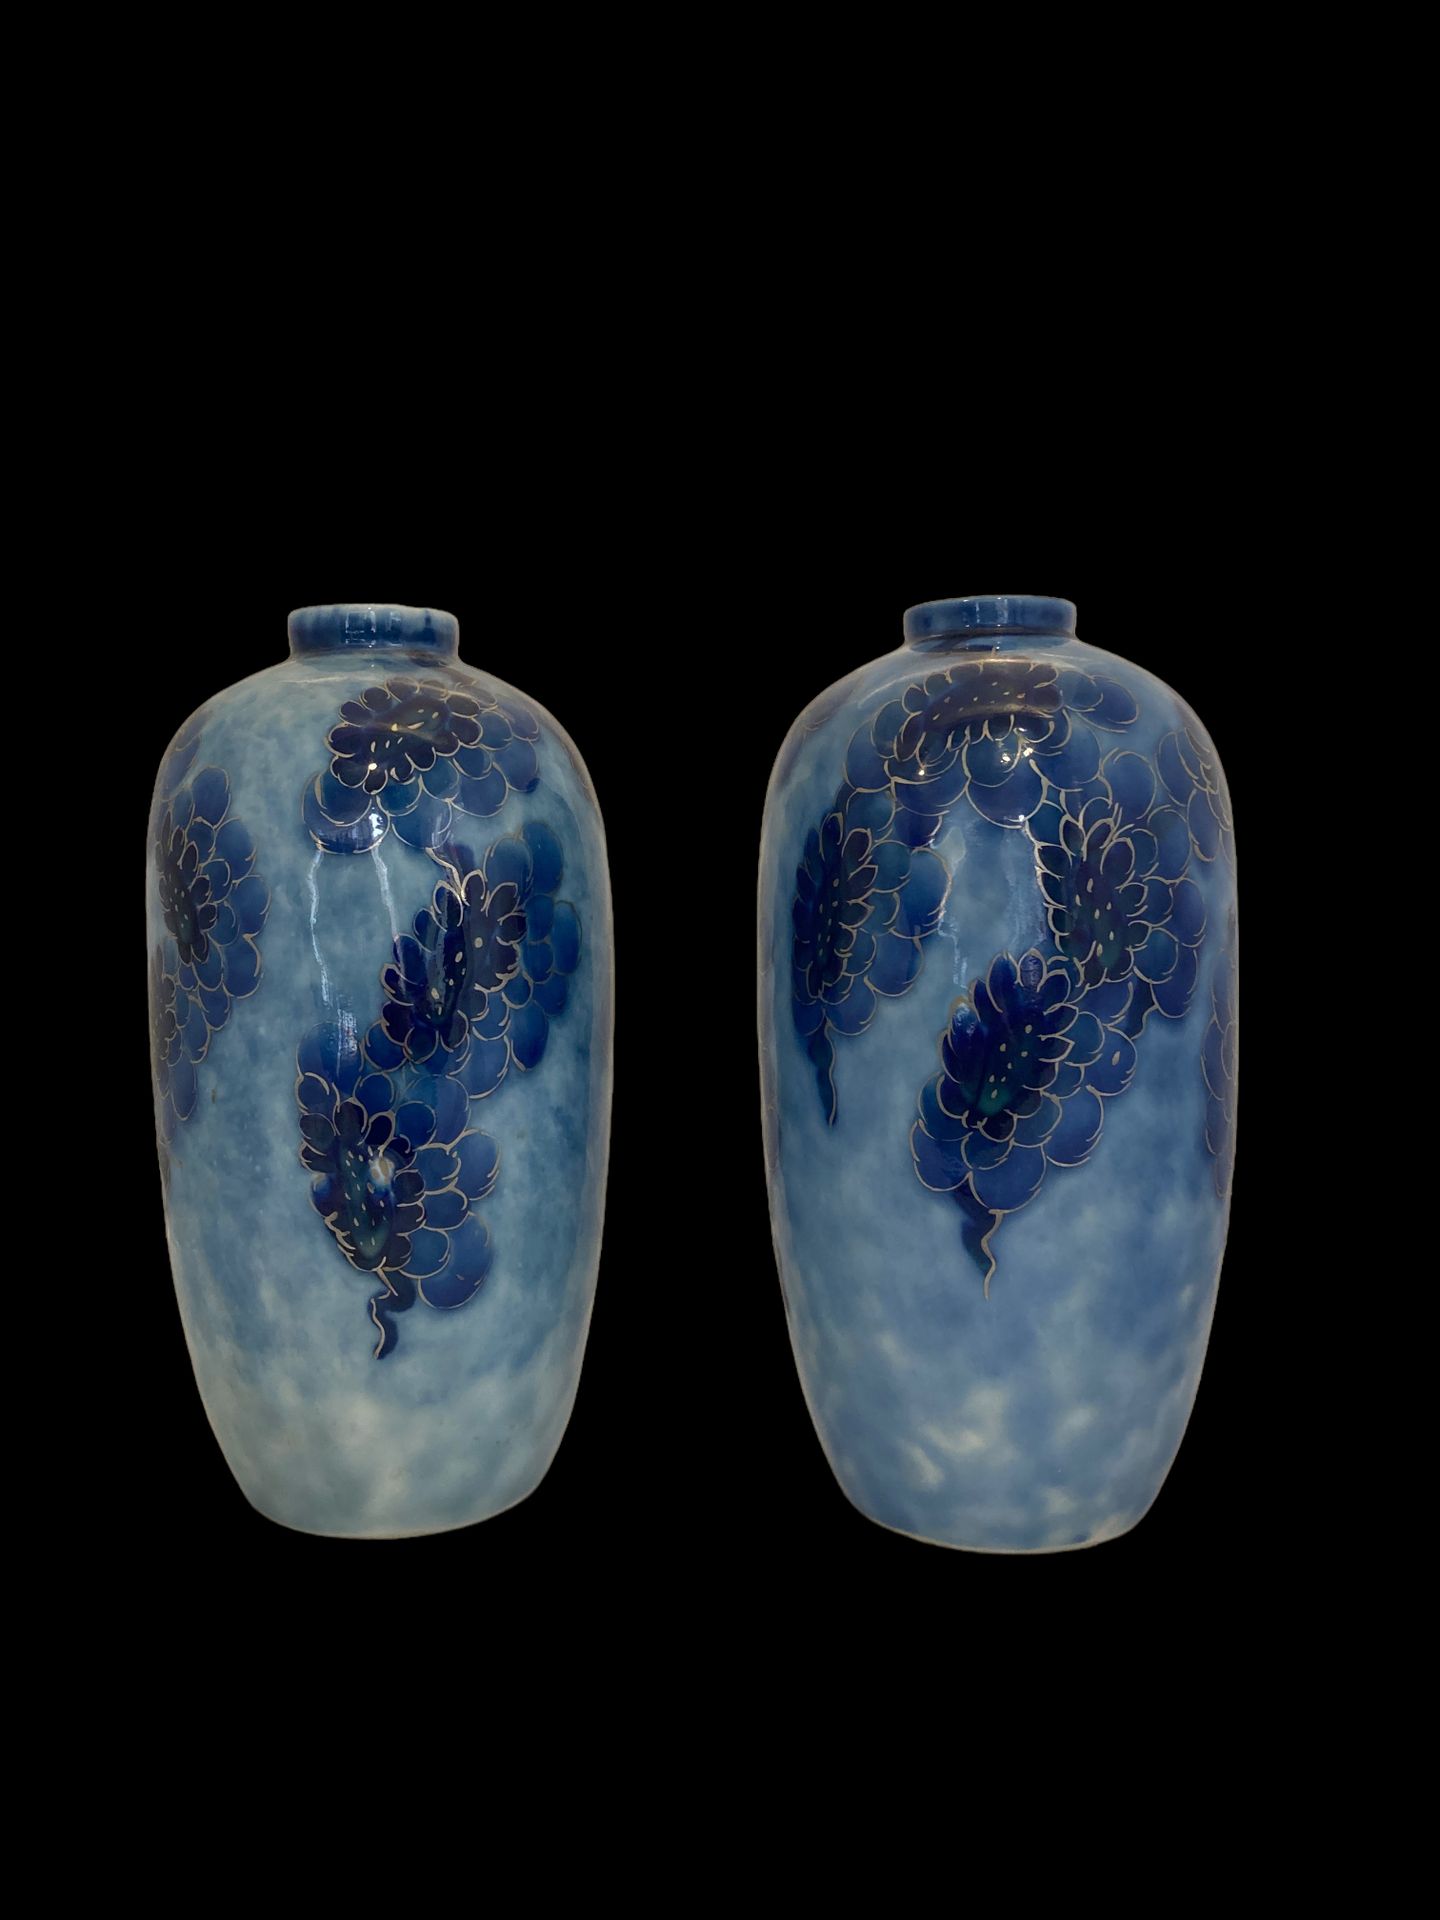 Null Camille THARAUD (1878-1956)

Pair of ovoid vases, in porcelain of Limoges d&hellip;